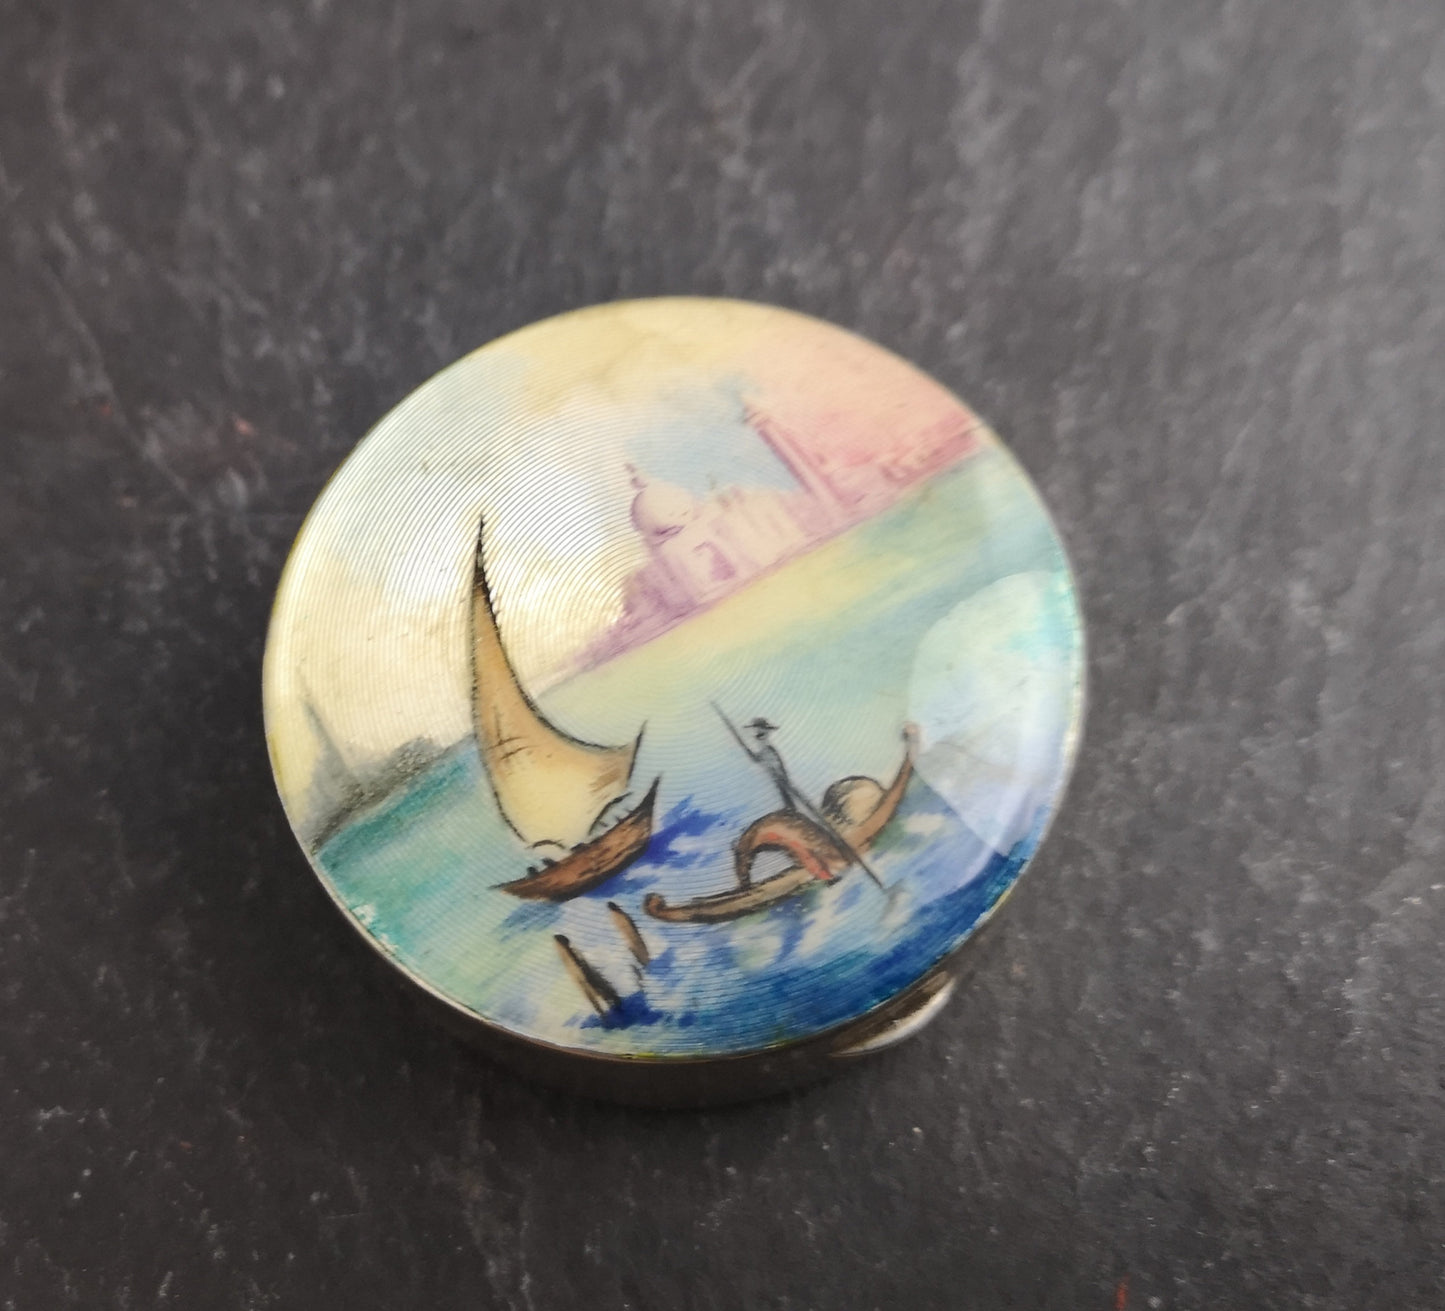 Vintage sterling silver and guilloche enamel box, hand painted scene, 1920's